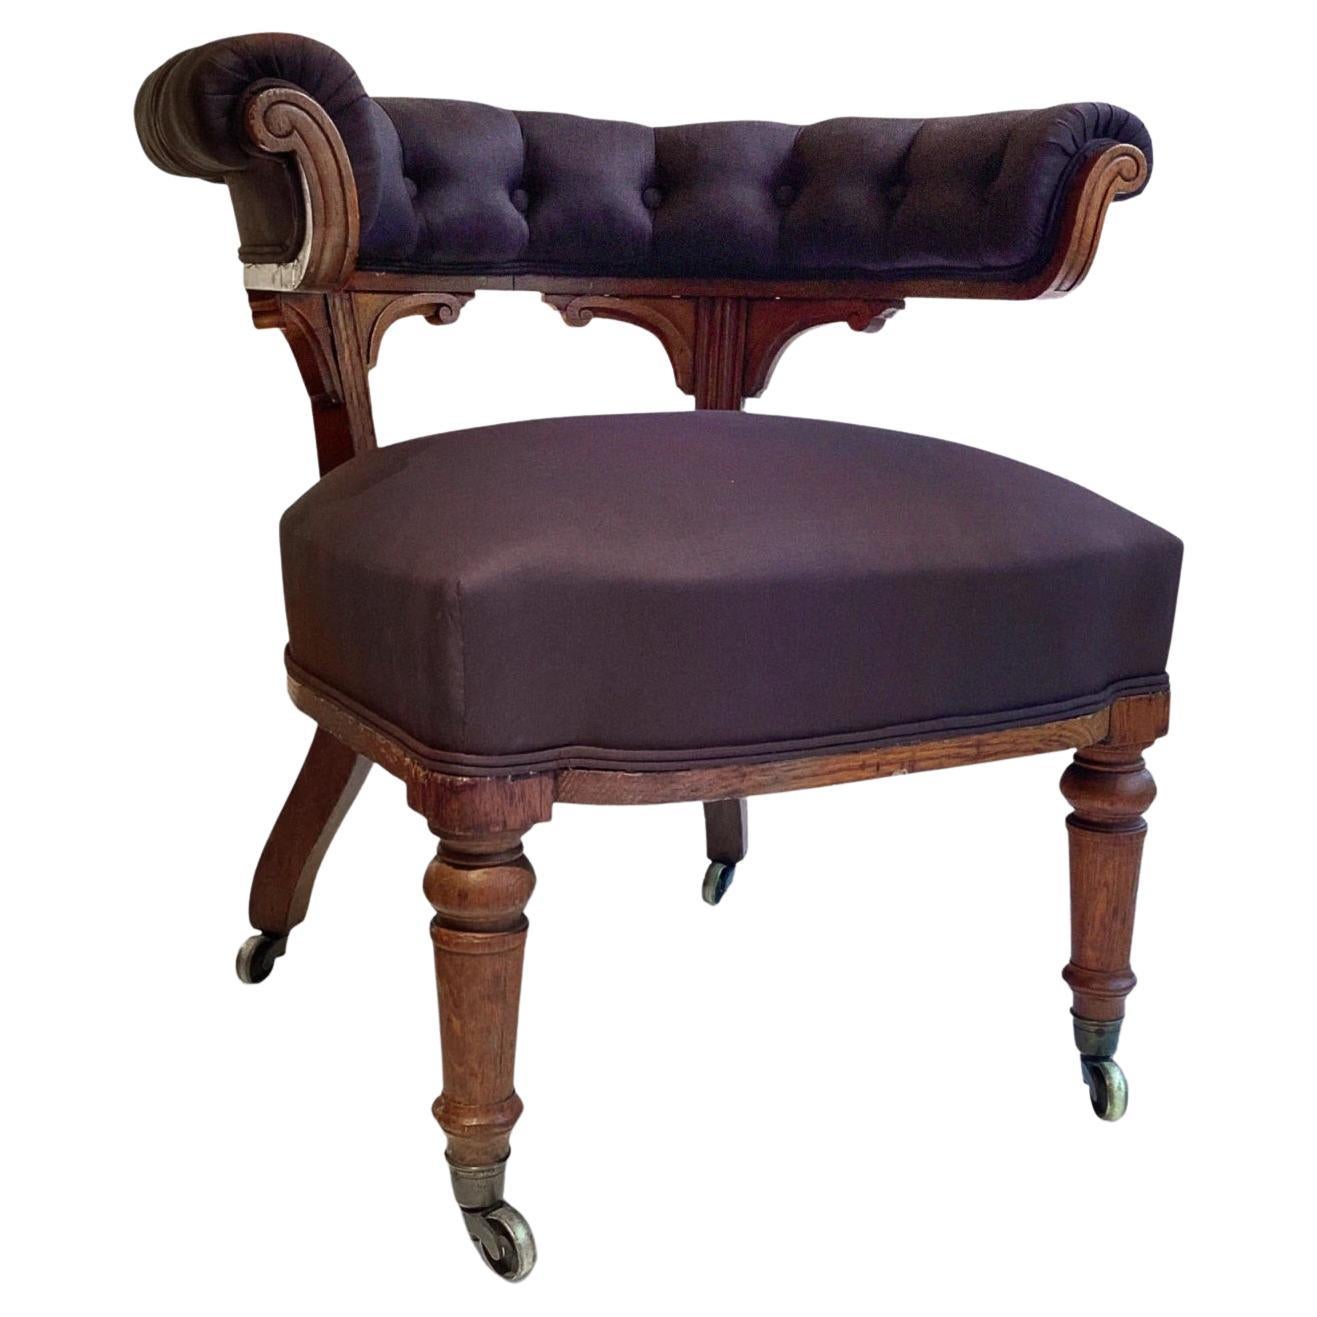 Holland and Sons Oak Library Chair Upholstered in Claremont Silk